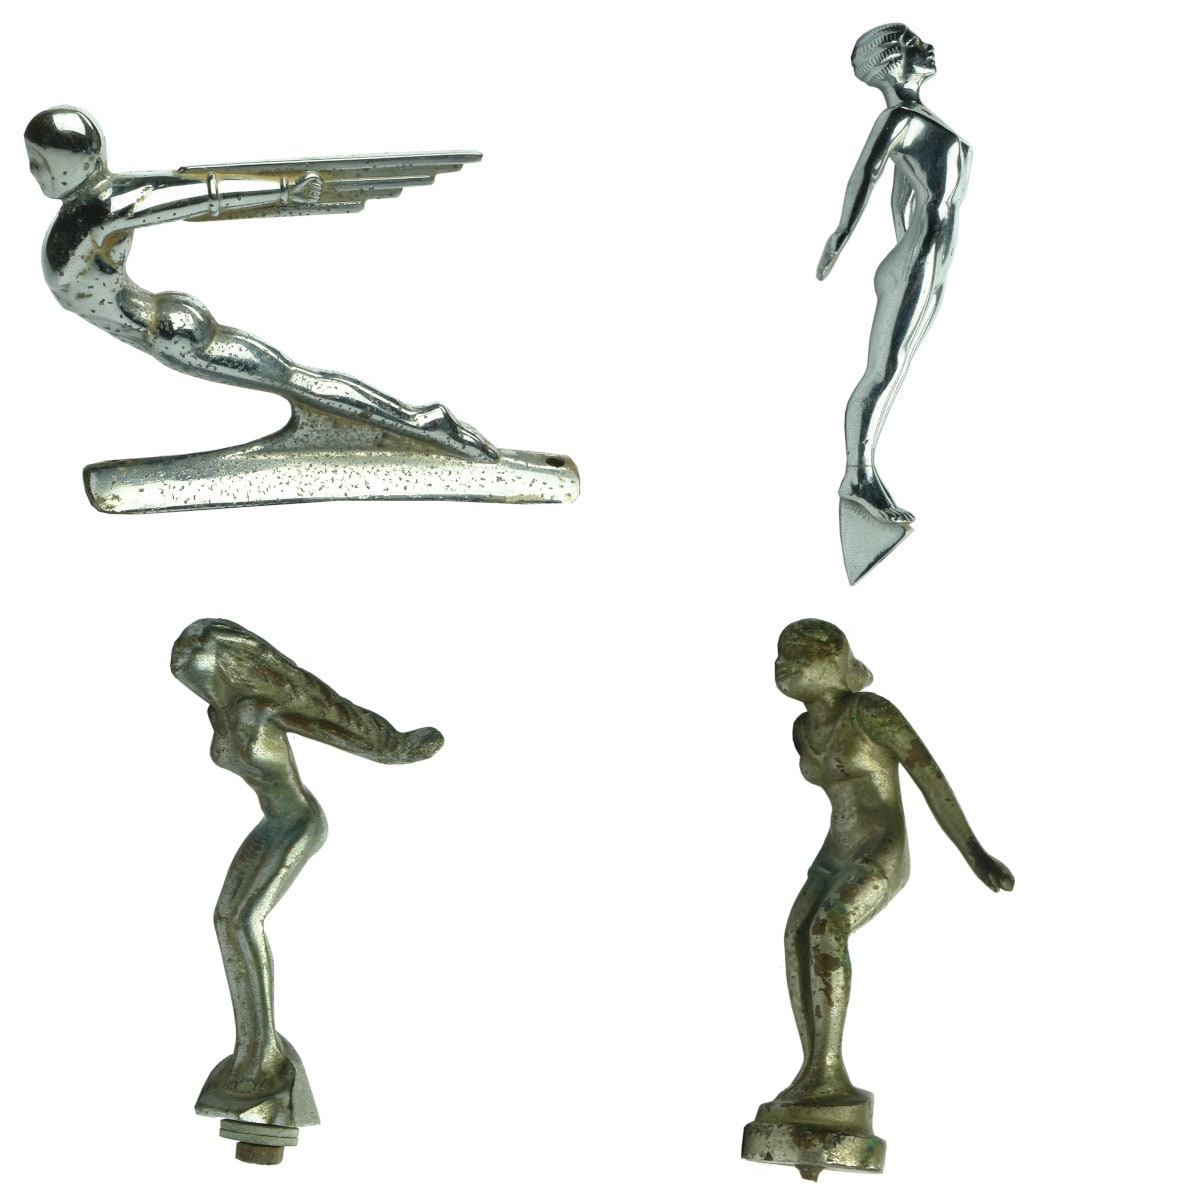 Four Metal Hood Ornament type items. 2 with Chrome finish and 2 that are duller. All different.